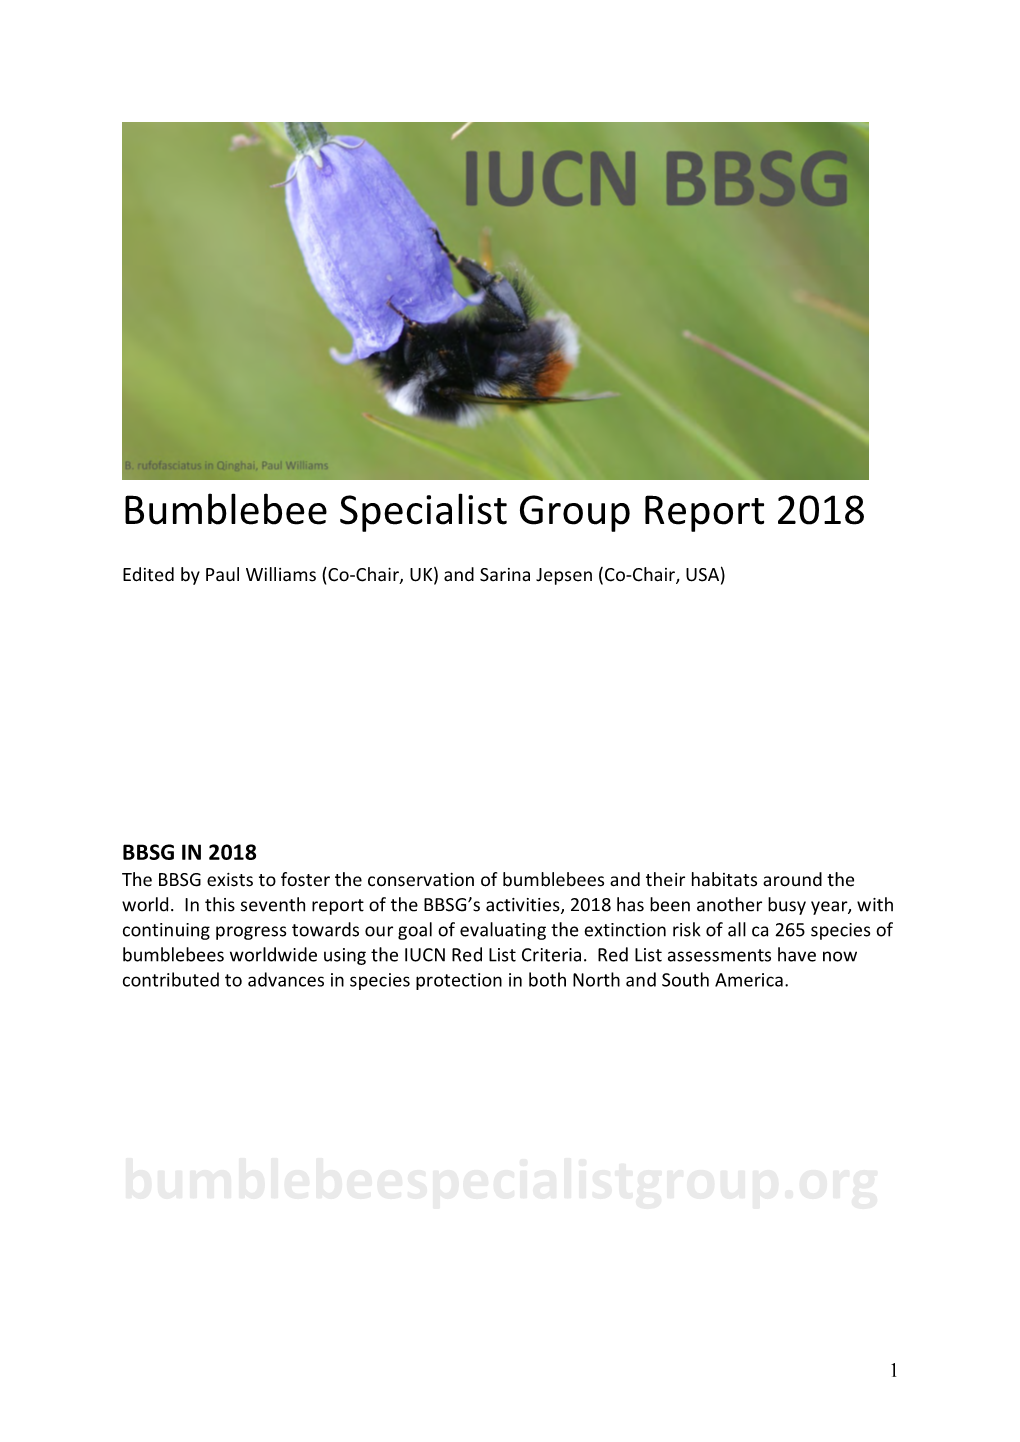 2018 Report of the Bumblebee Specialist Group